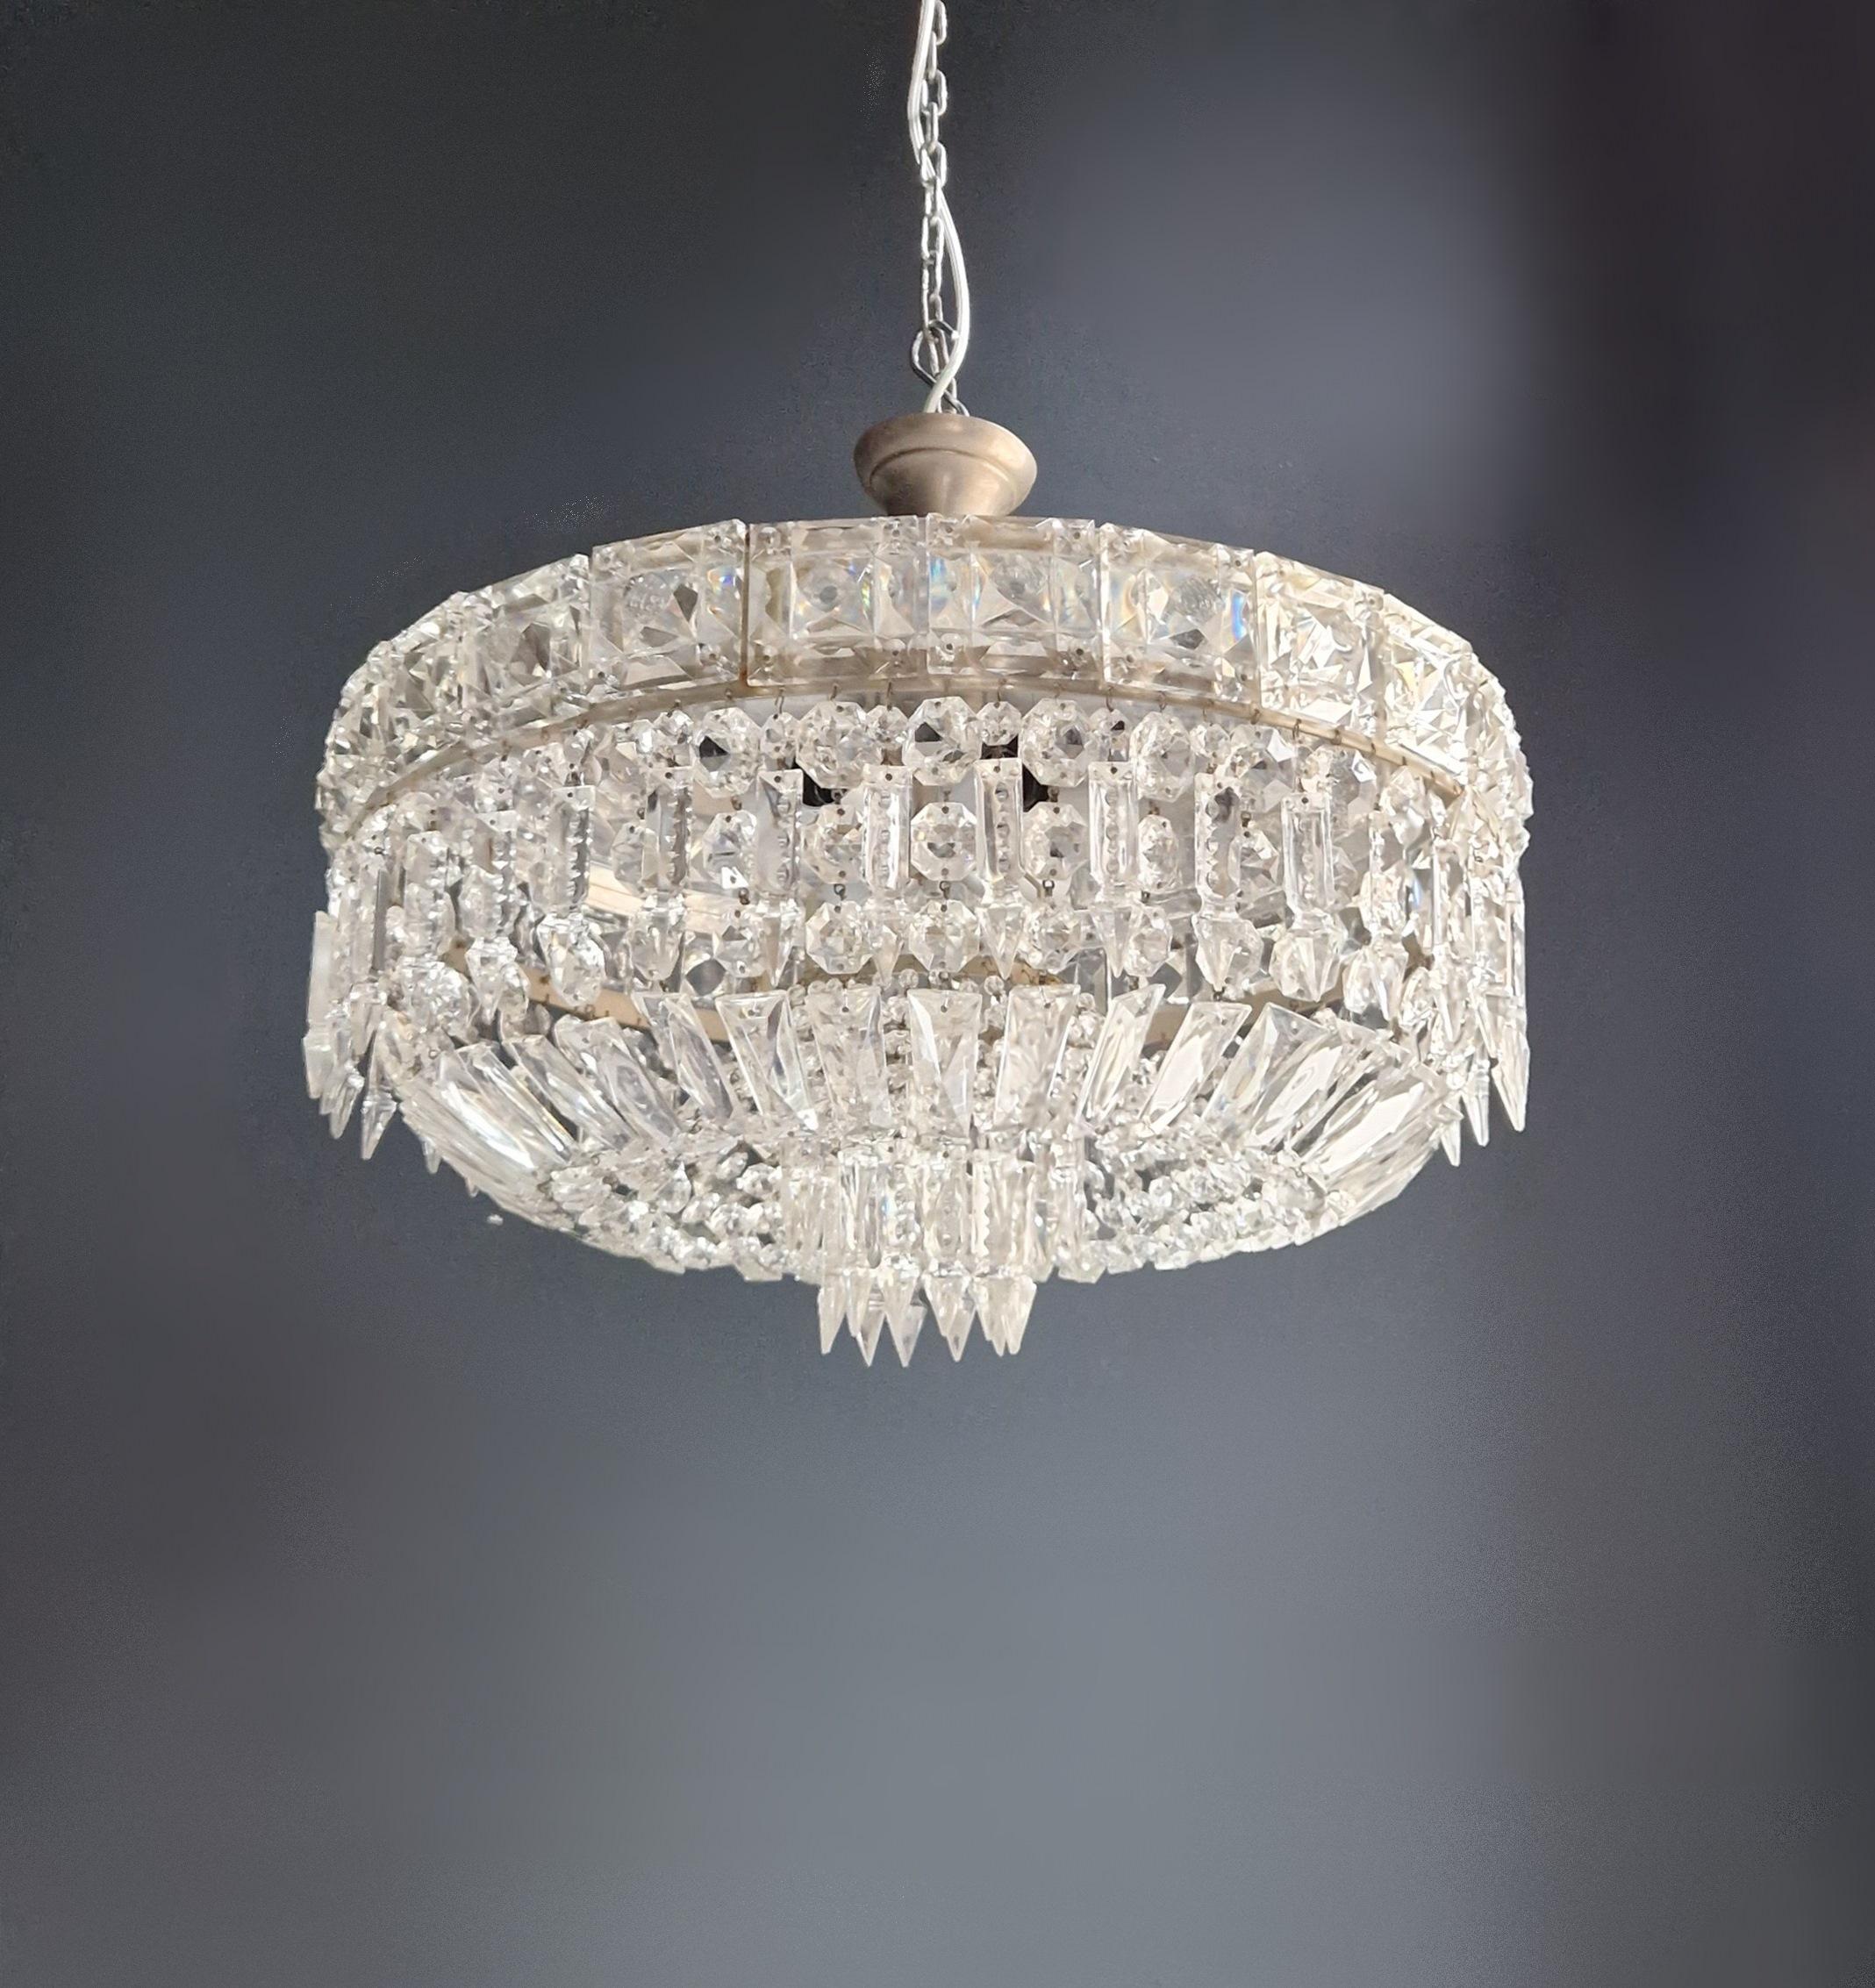 Introducing an exquisite Art Deco Low Plafonnier Silver Crystal Chandelier Lustre Ceiling Lamp, showcasing the timeless charm of antique craftsmanship. This old chandelier has been meticulously restored with love and expertise in Berlin. It has been